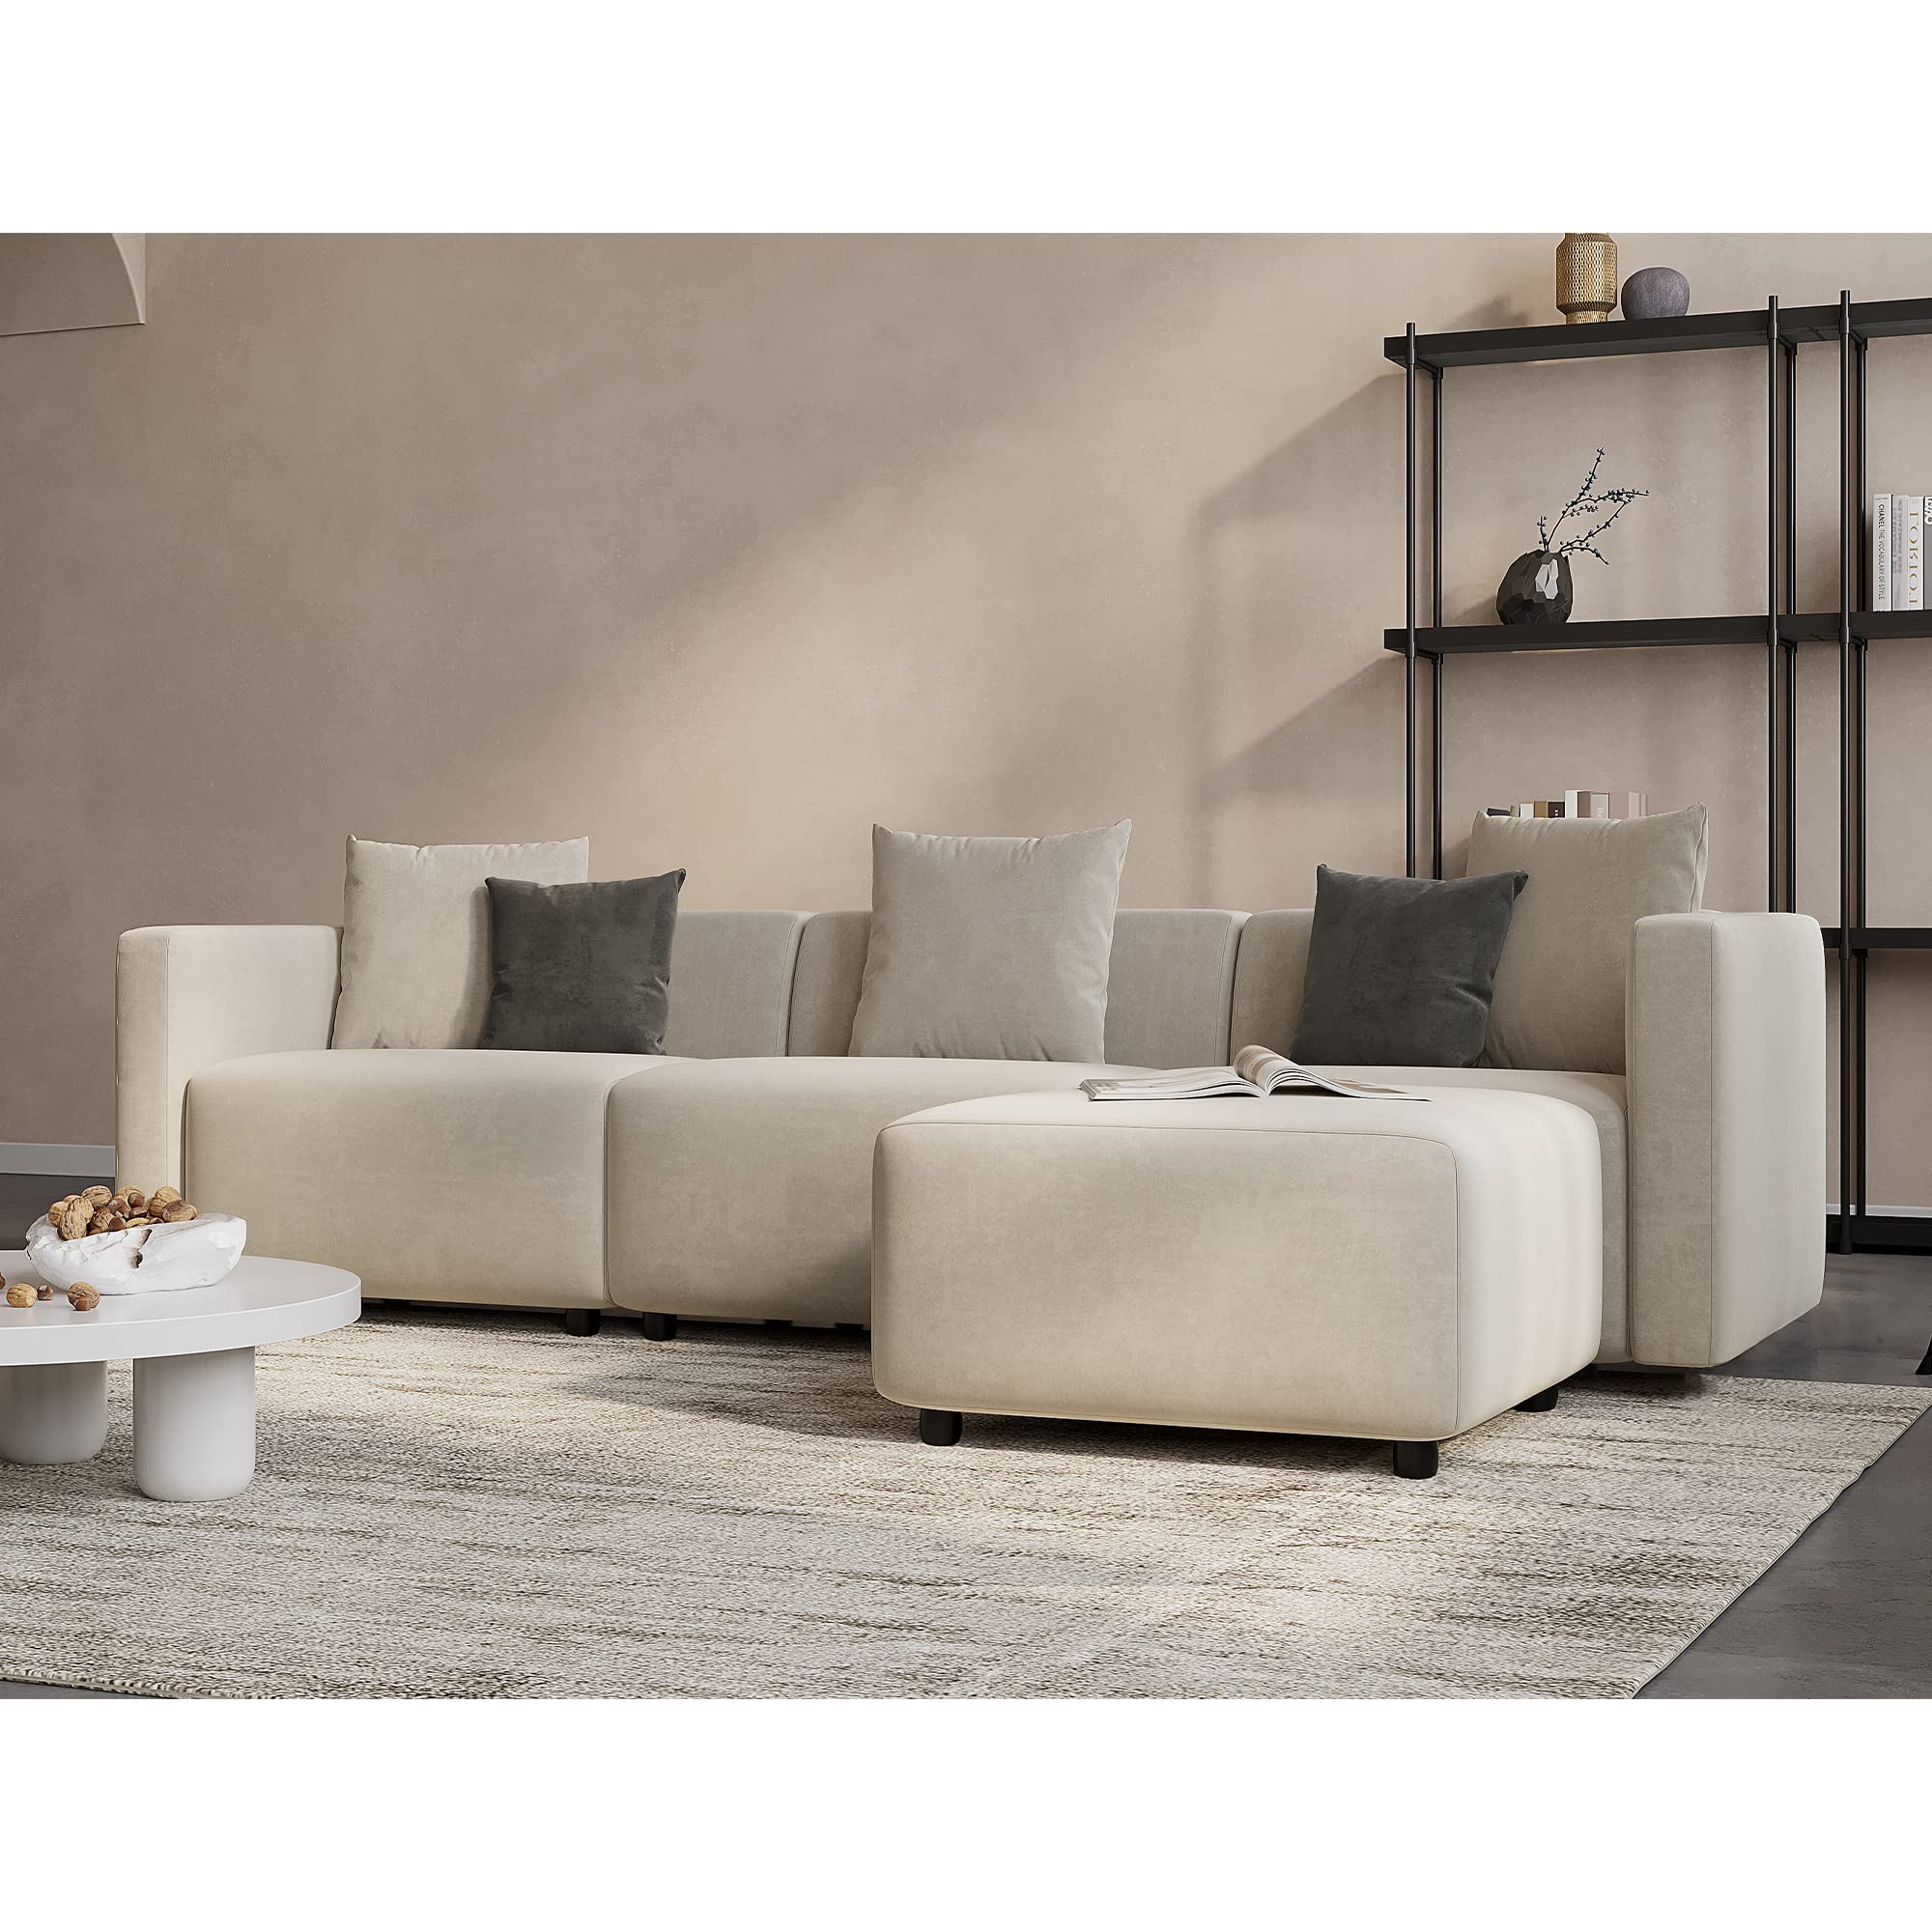 Acanva Luxury L-Shaped Upholstery Convertible Modular Sectional Sofa, Contemporary Reversible Couch with Chaise Lounge for Livin